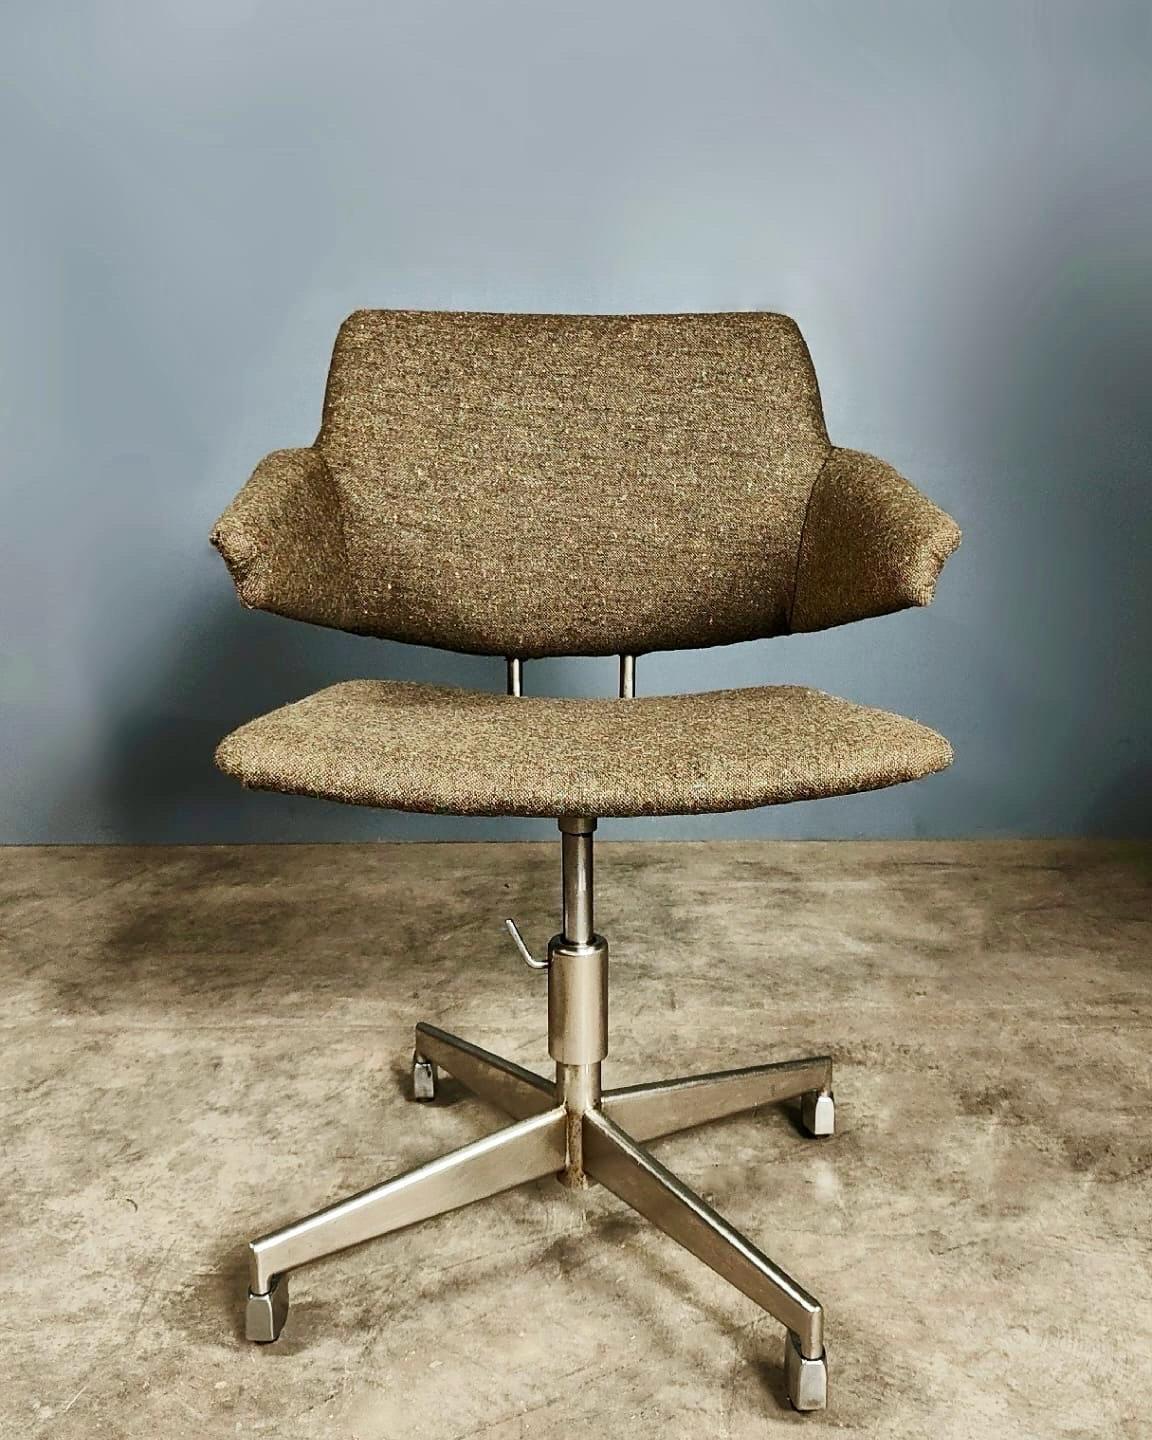 New Stock ✅

Danish Office Swivel Chair by Jacob Jensen for Labofa Mobler Mid Century Vintage Retro MCM

Rare and beautiful Danish modern desk chair designed by Jacob Jensen for Labofa Mobler.

Manufactured in Denmark from the 1960s, this